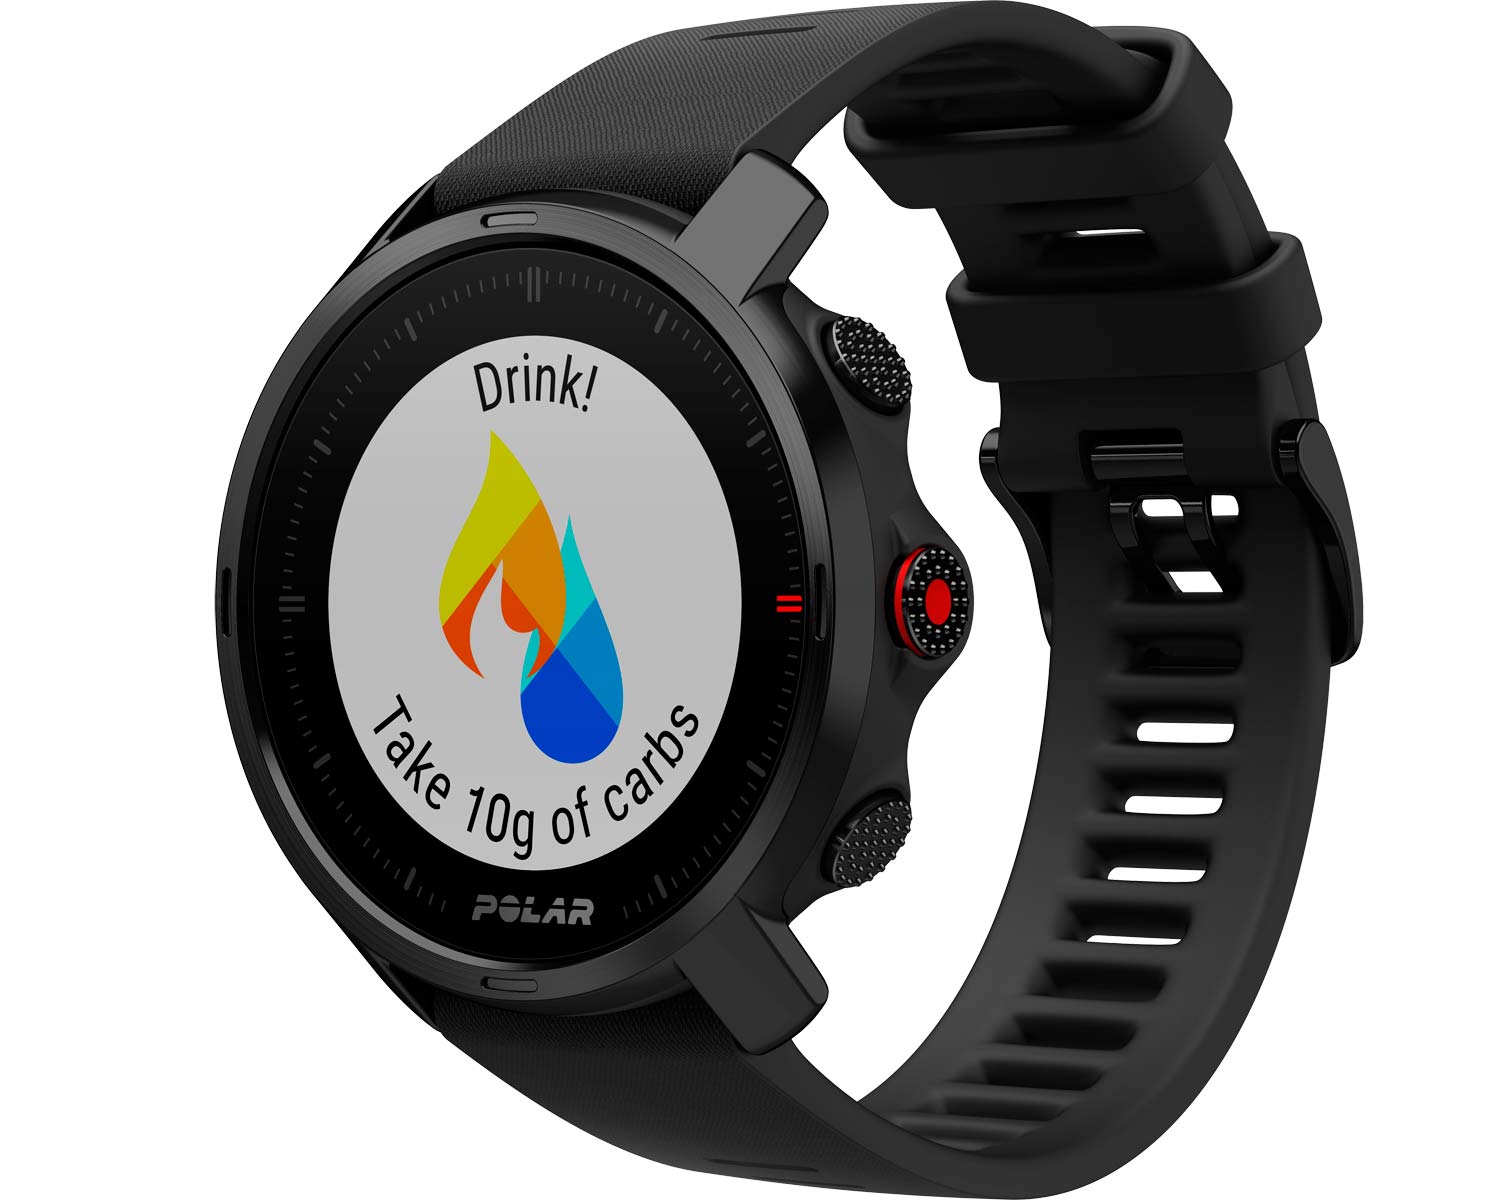 Polar Grit X GPS smartwatch, wrist-based heart rate GPS tracking training smart watch cycle computer for cyclists runners fuelwise